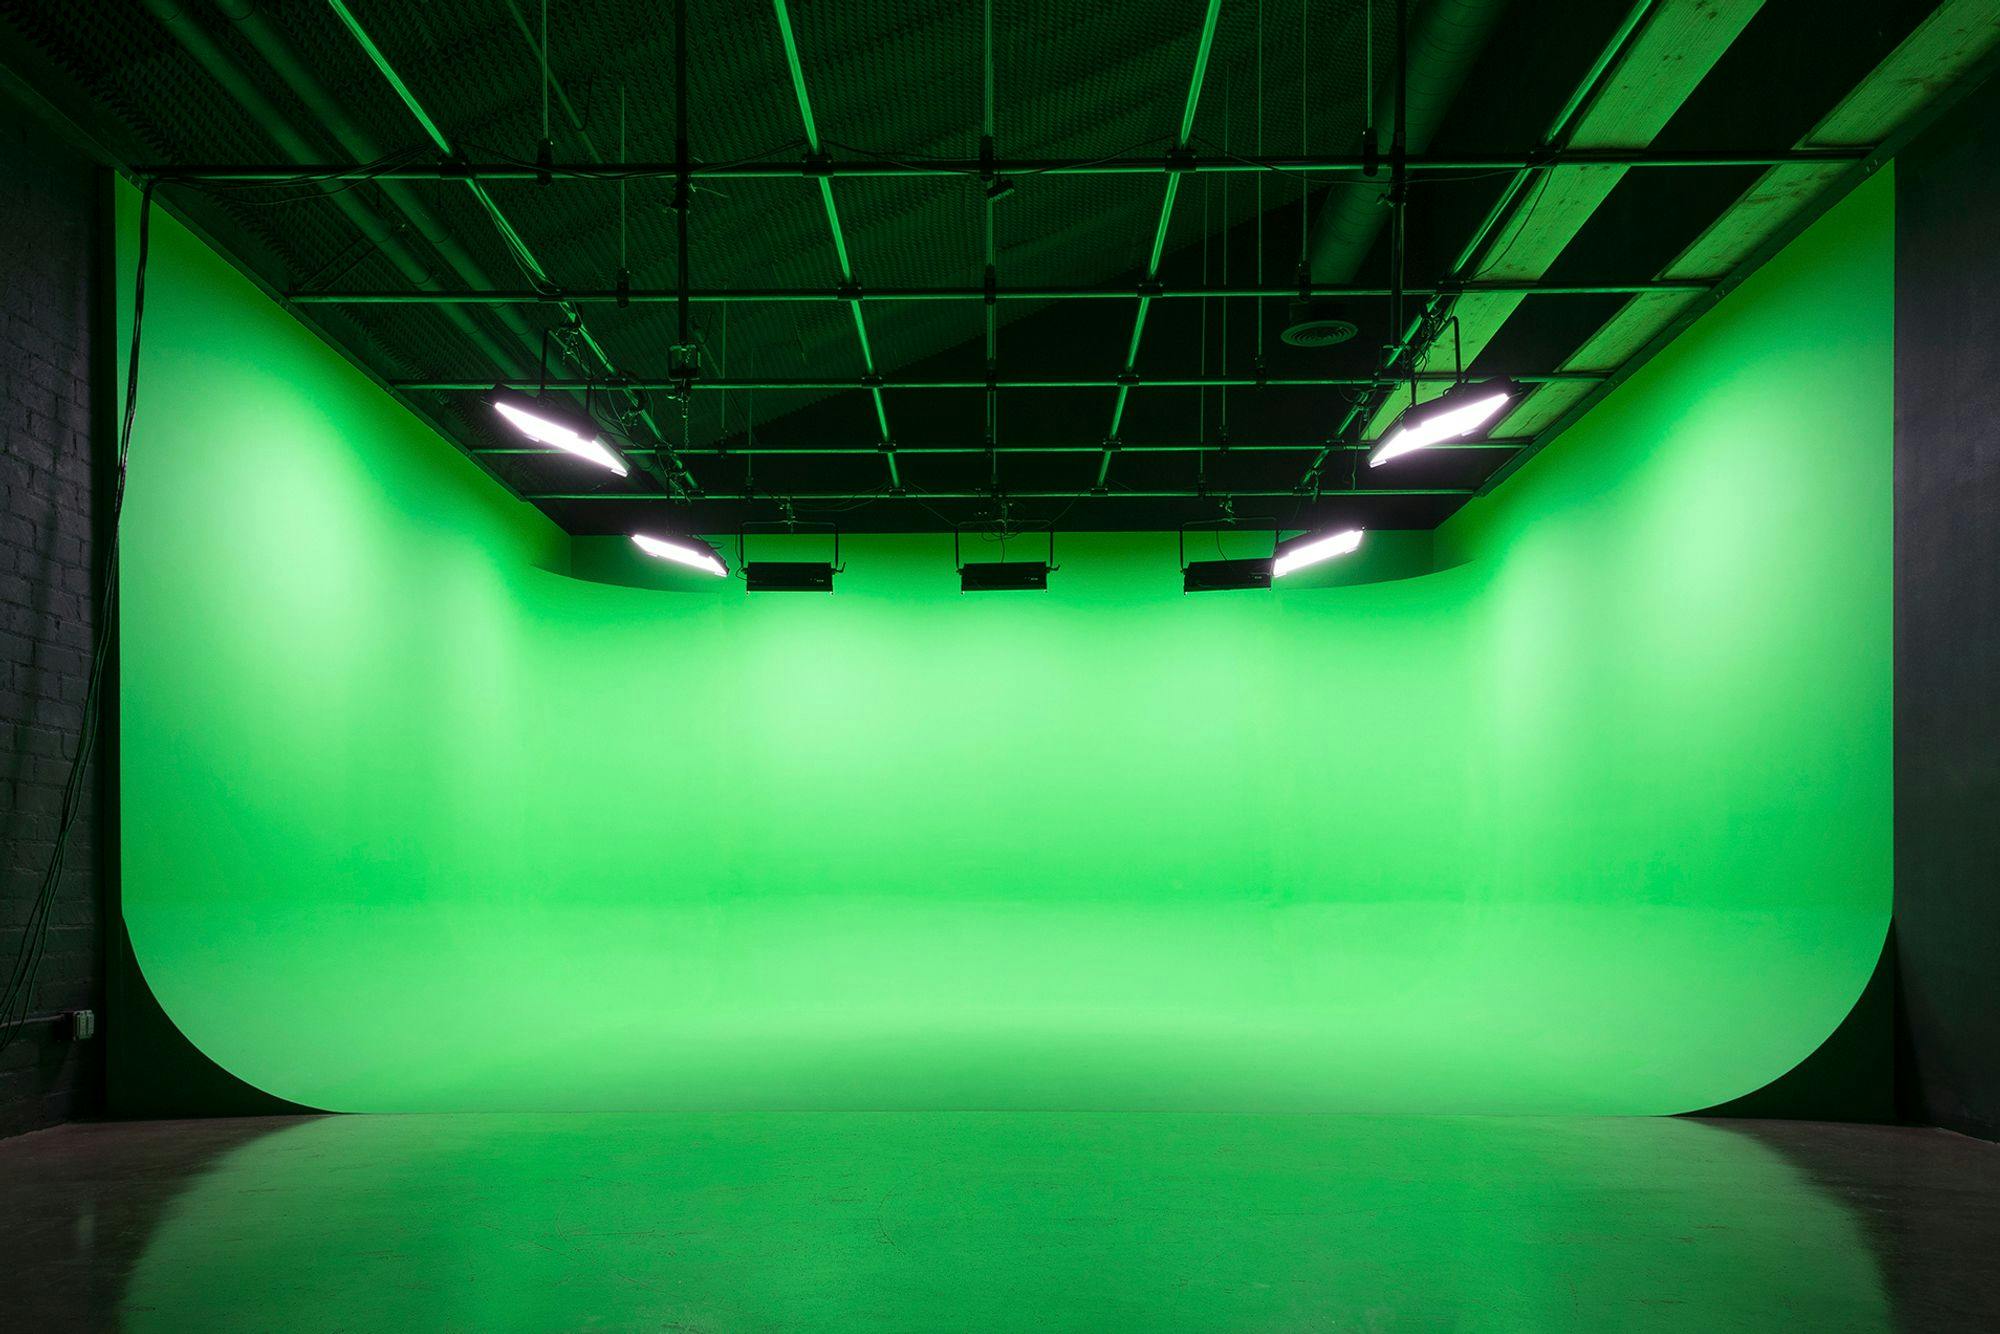 A modern studio with vibrant green cyclorama for chroma key effects, featuring overhead lighting fixtures on a dark ceiling and a concrete floor.